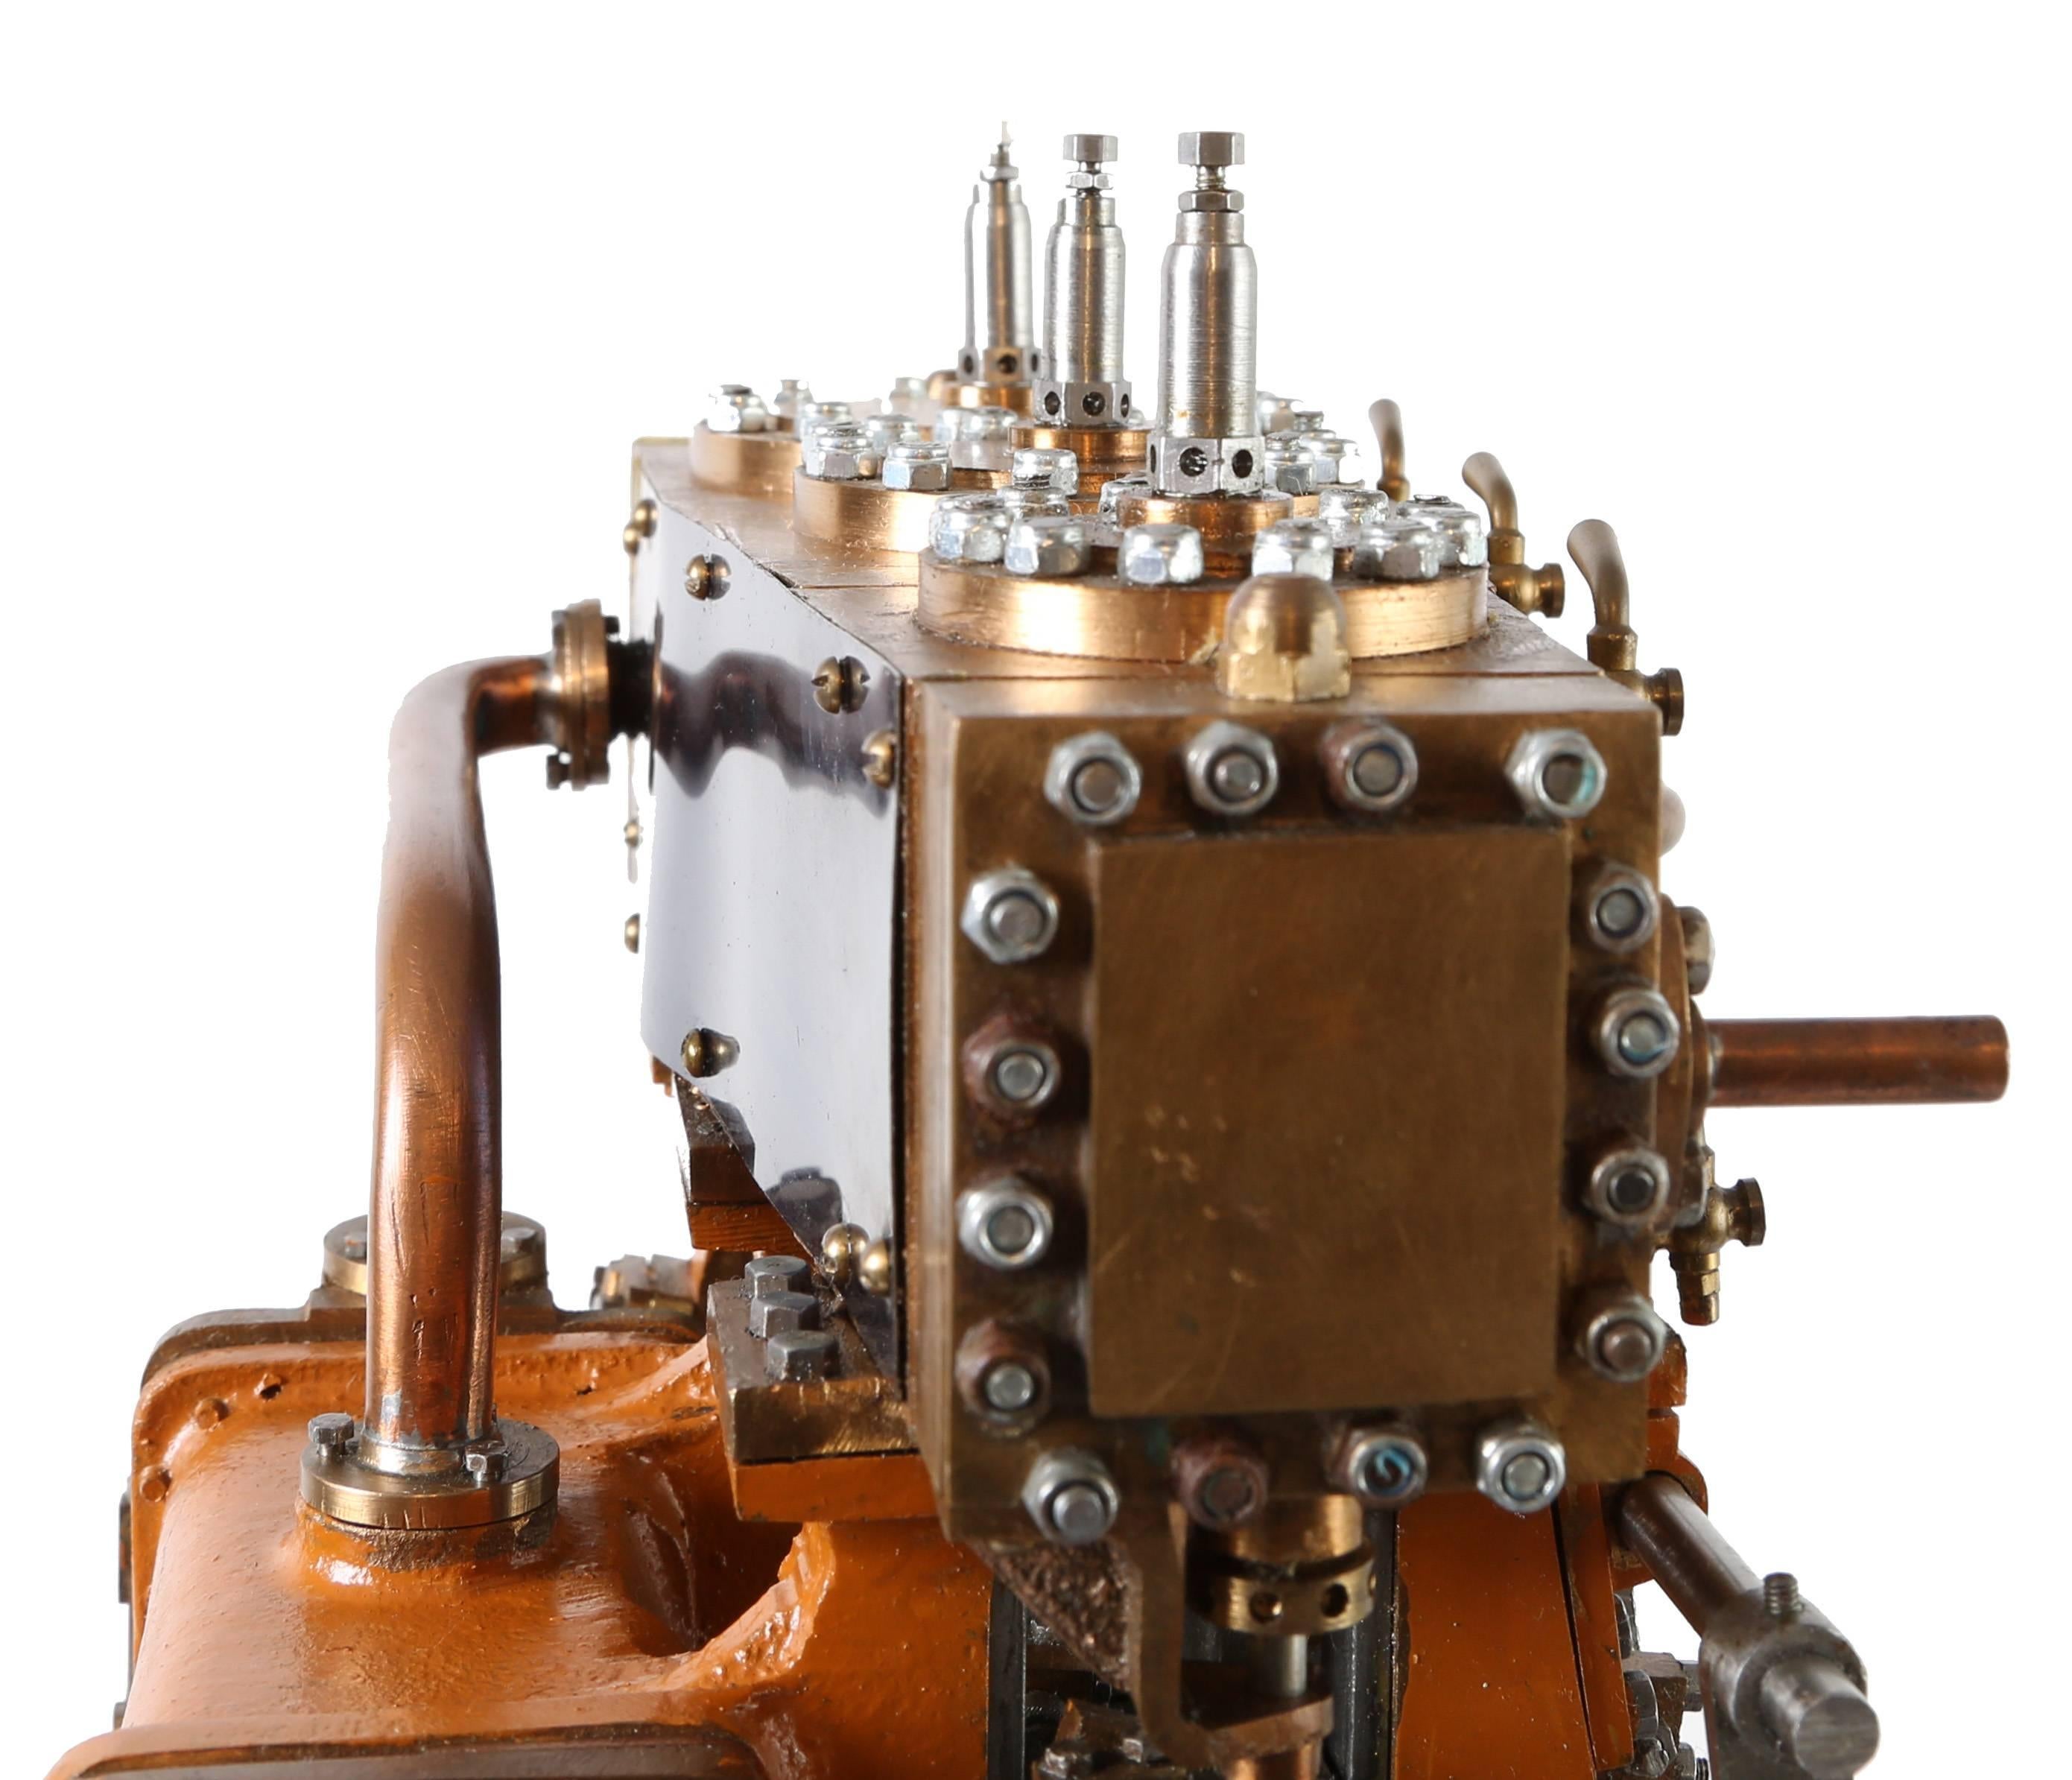 A beautifully constructed scale model of a triple expansion marine steam engine to the O. B. Bolton design, in working state (air pressure) The three cylinder triple expansion is typical of 19th century practice with condensing tank, air pump, slide